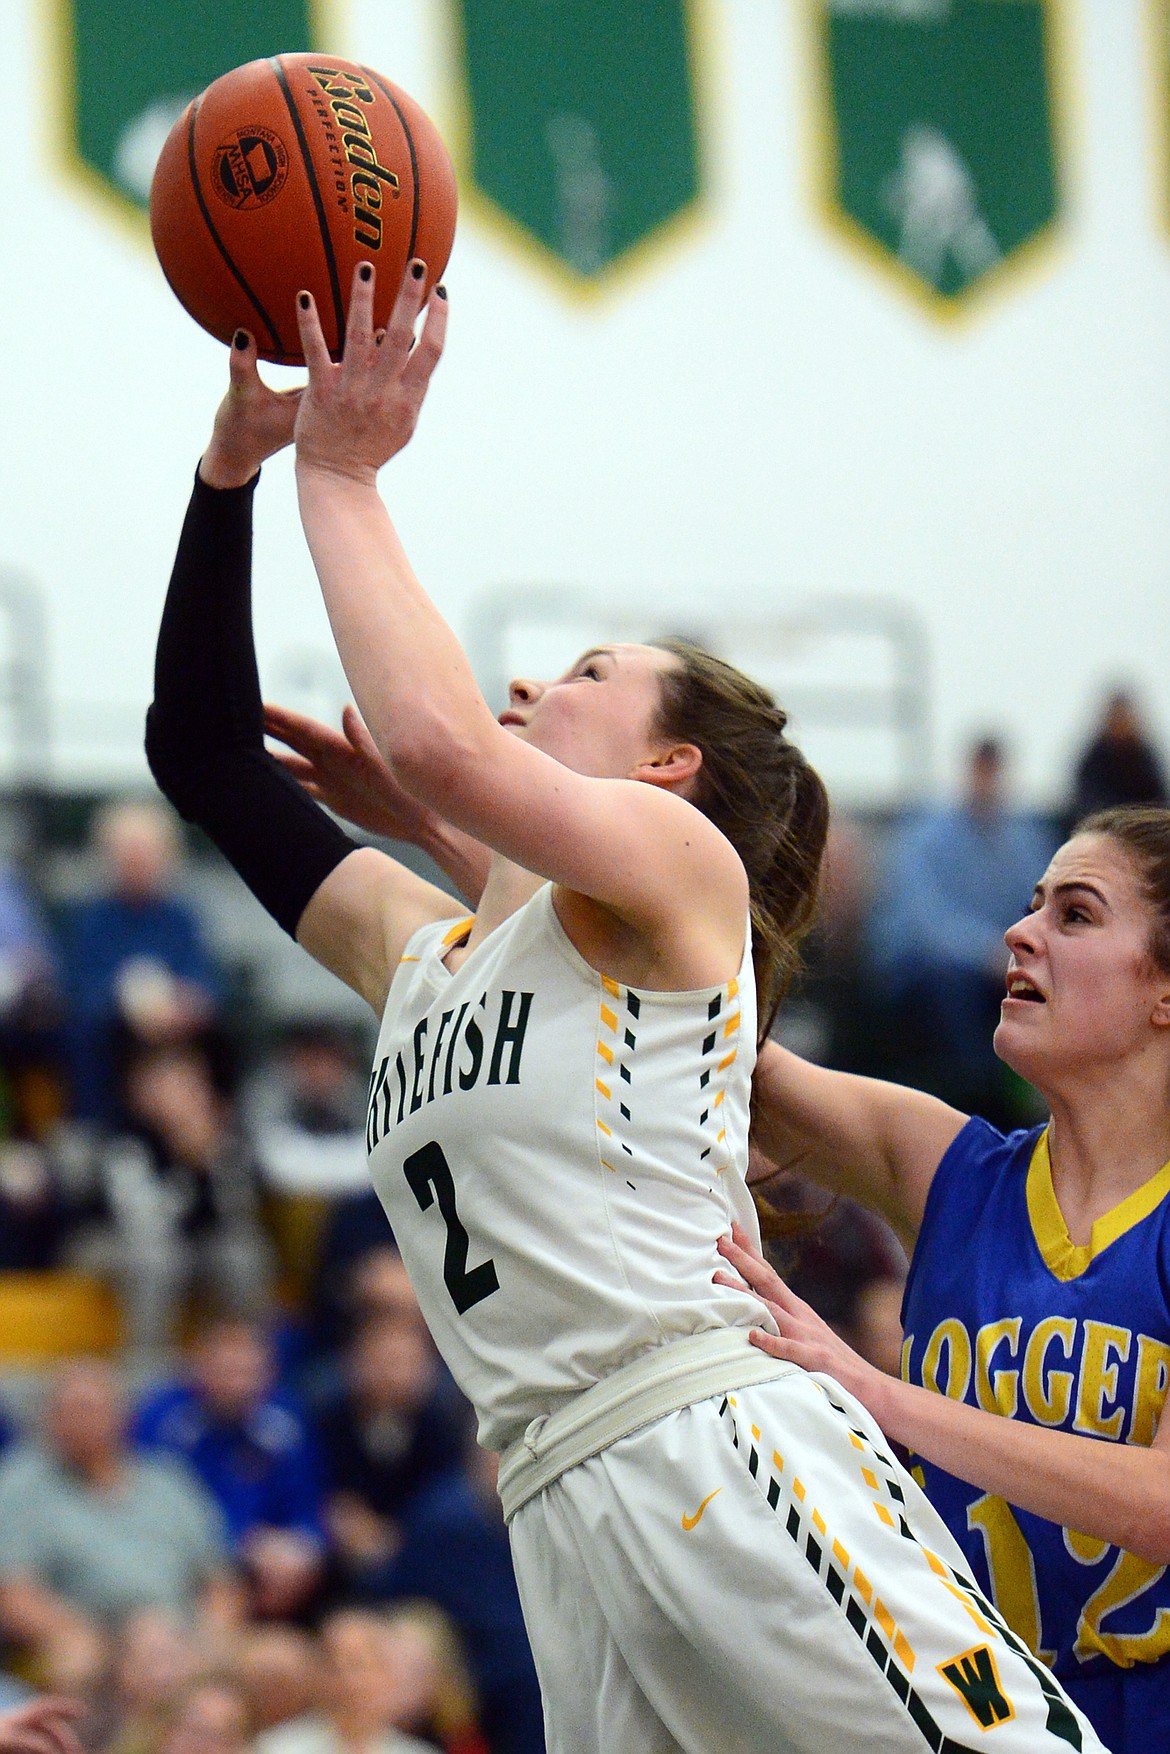 Whitefish's Kaiah Moore (2) drives to the hoop against Libby's Alli Collins (12) at Whitefish High School on Thursday. (Casey Kreider/Daily Inter Lake)